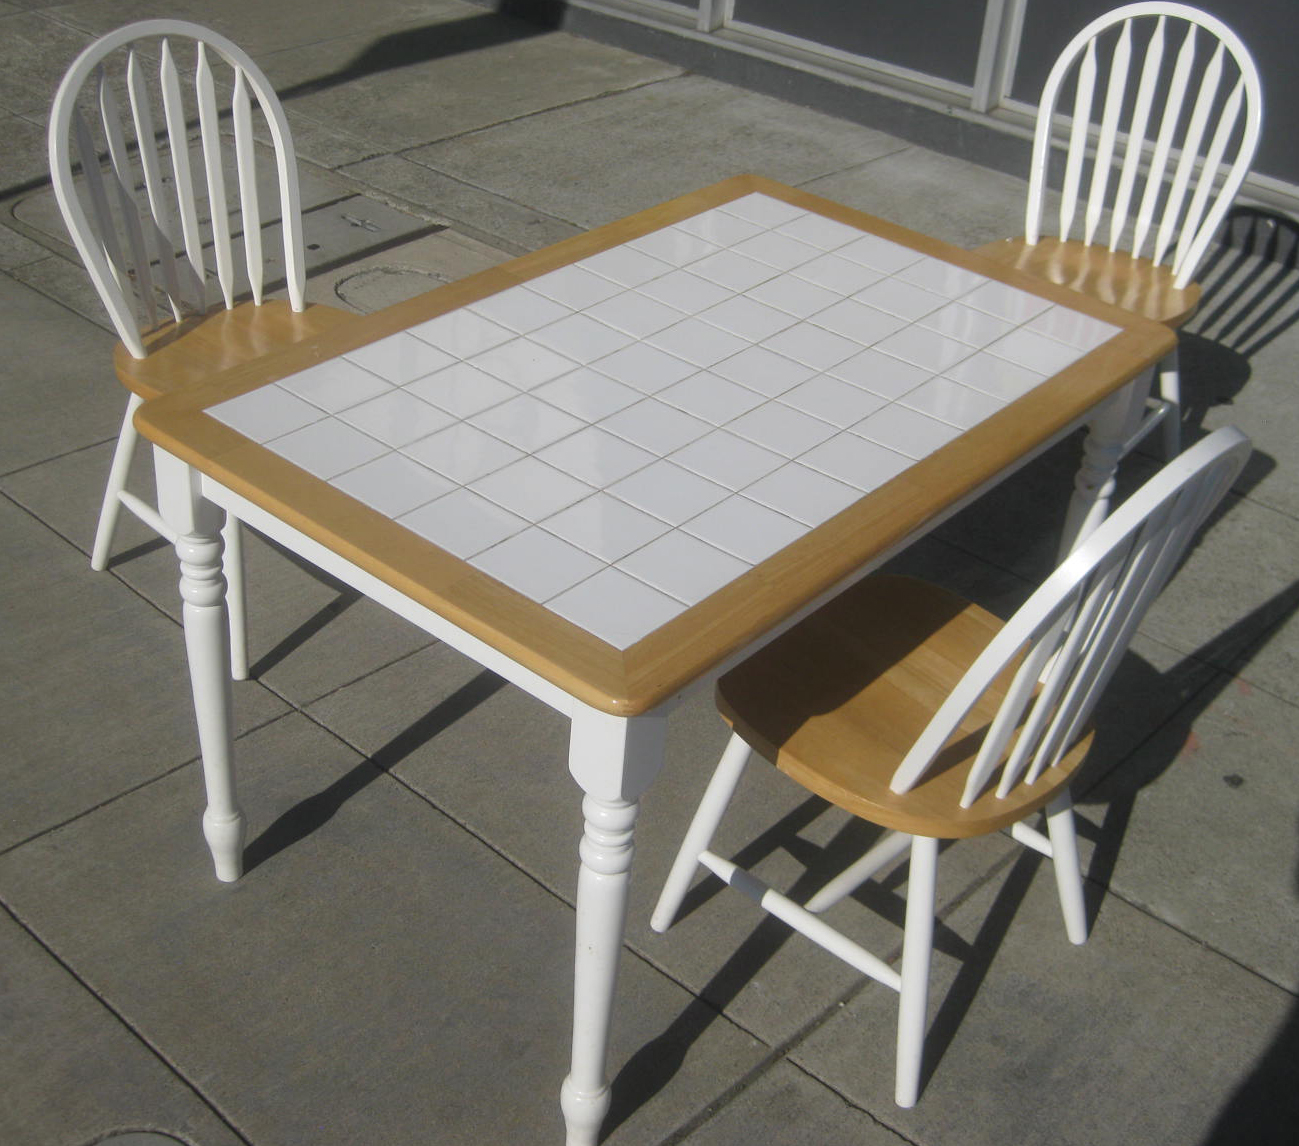 UHURU FURNITURE &amp; COLLECTIBLES: SOLD - Tile Top Table and ...